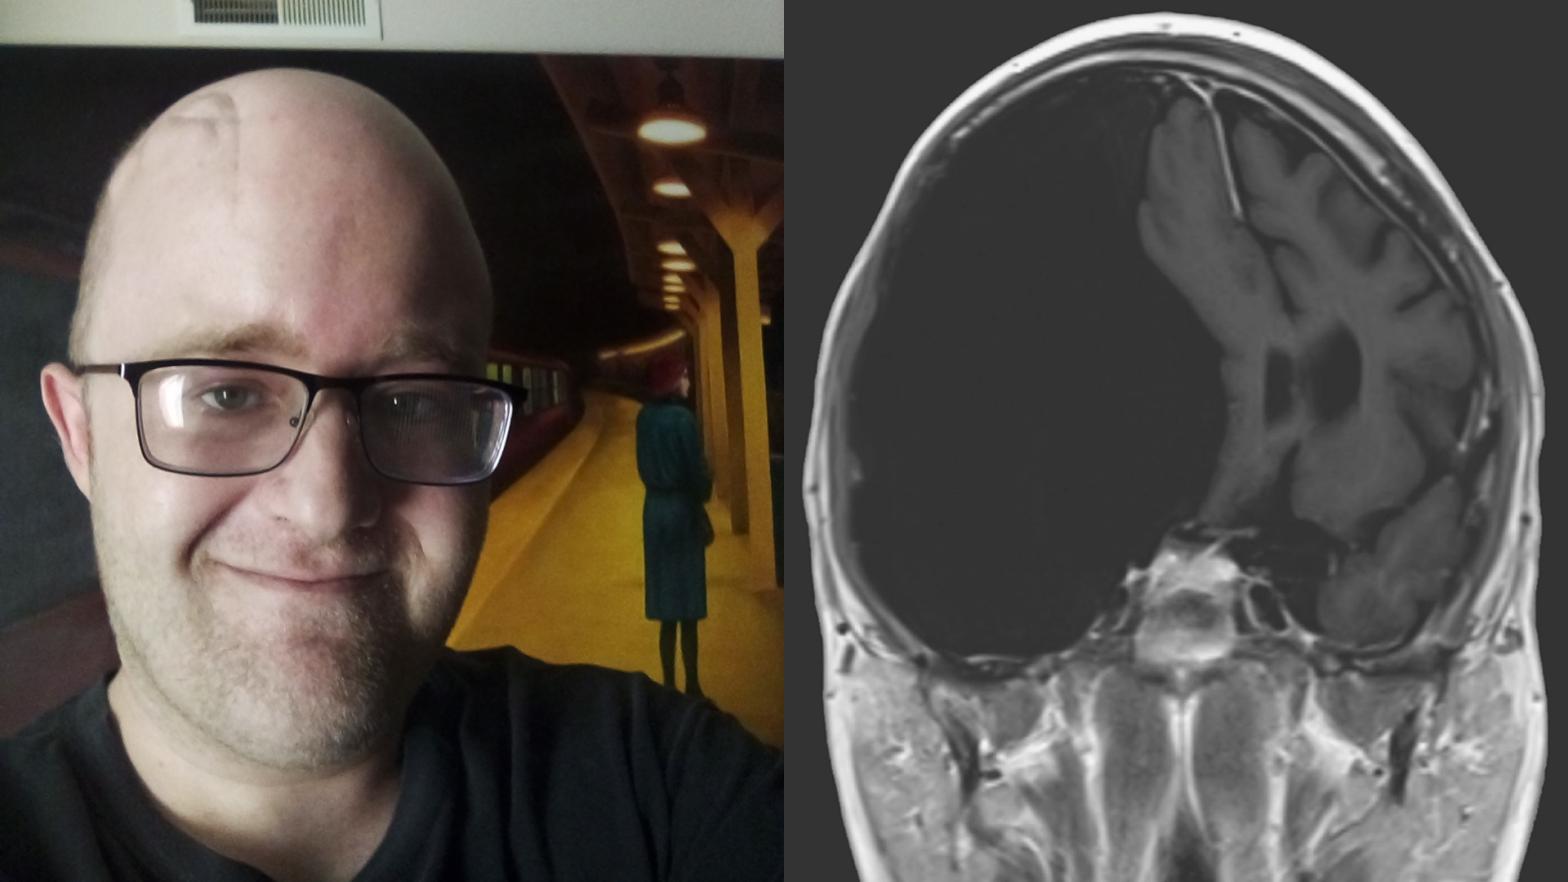 Tyler Leggett in August 2020 (left); the MRI scan of his brain that revealed the large cyst, taken in 2016 (right). Leggett's doctors say the cyst has not changed in size since then.  (Image: Tyler Leggett)